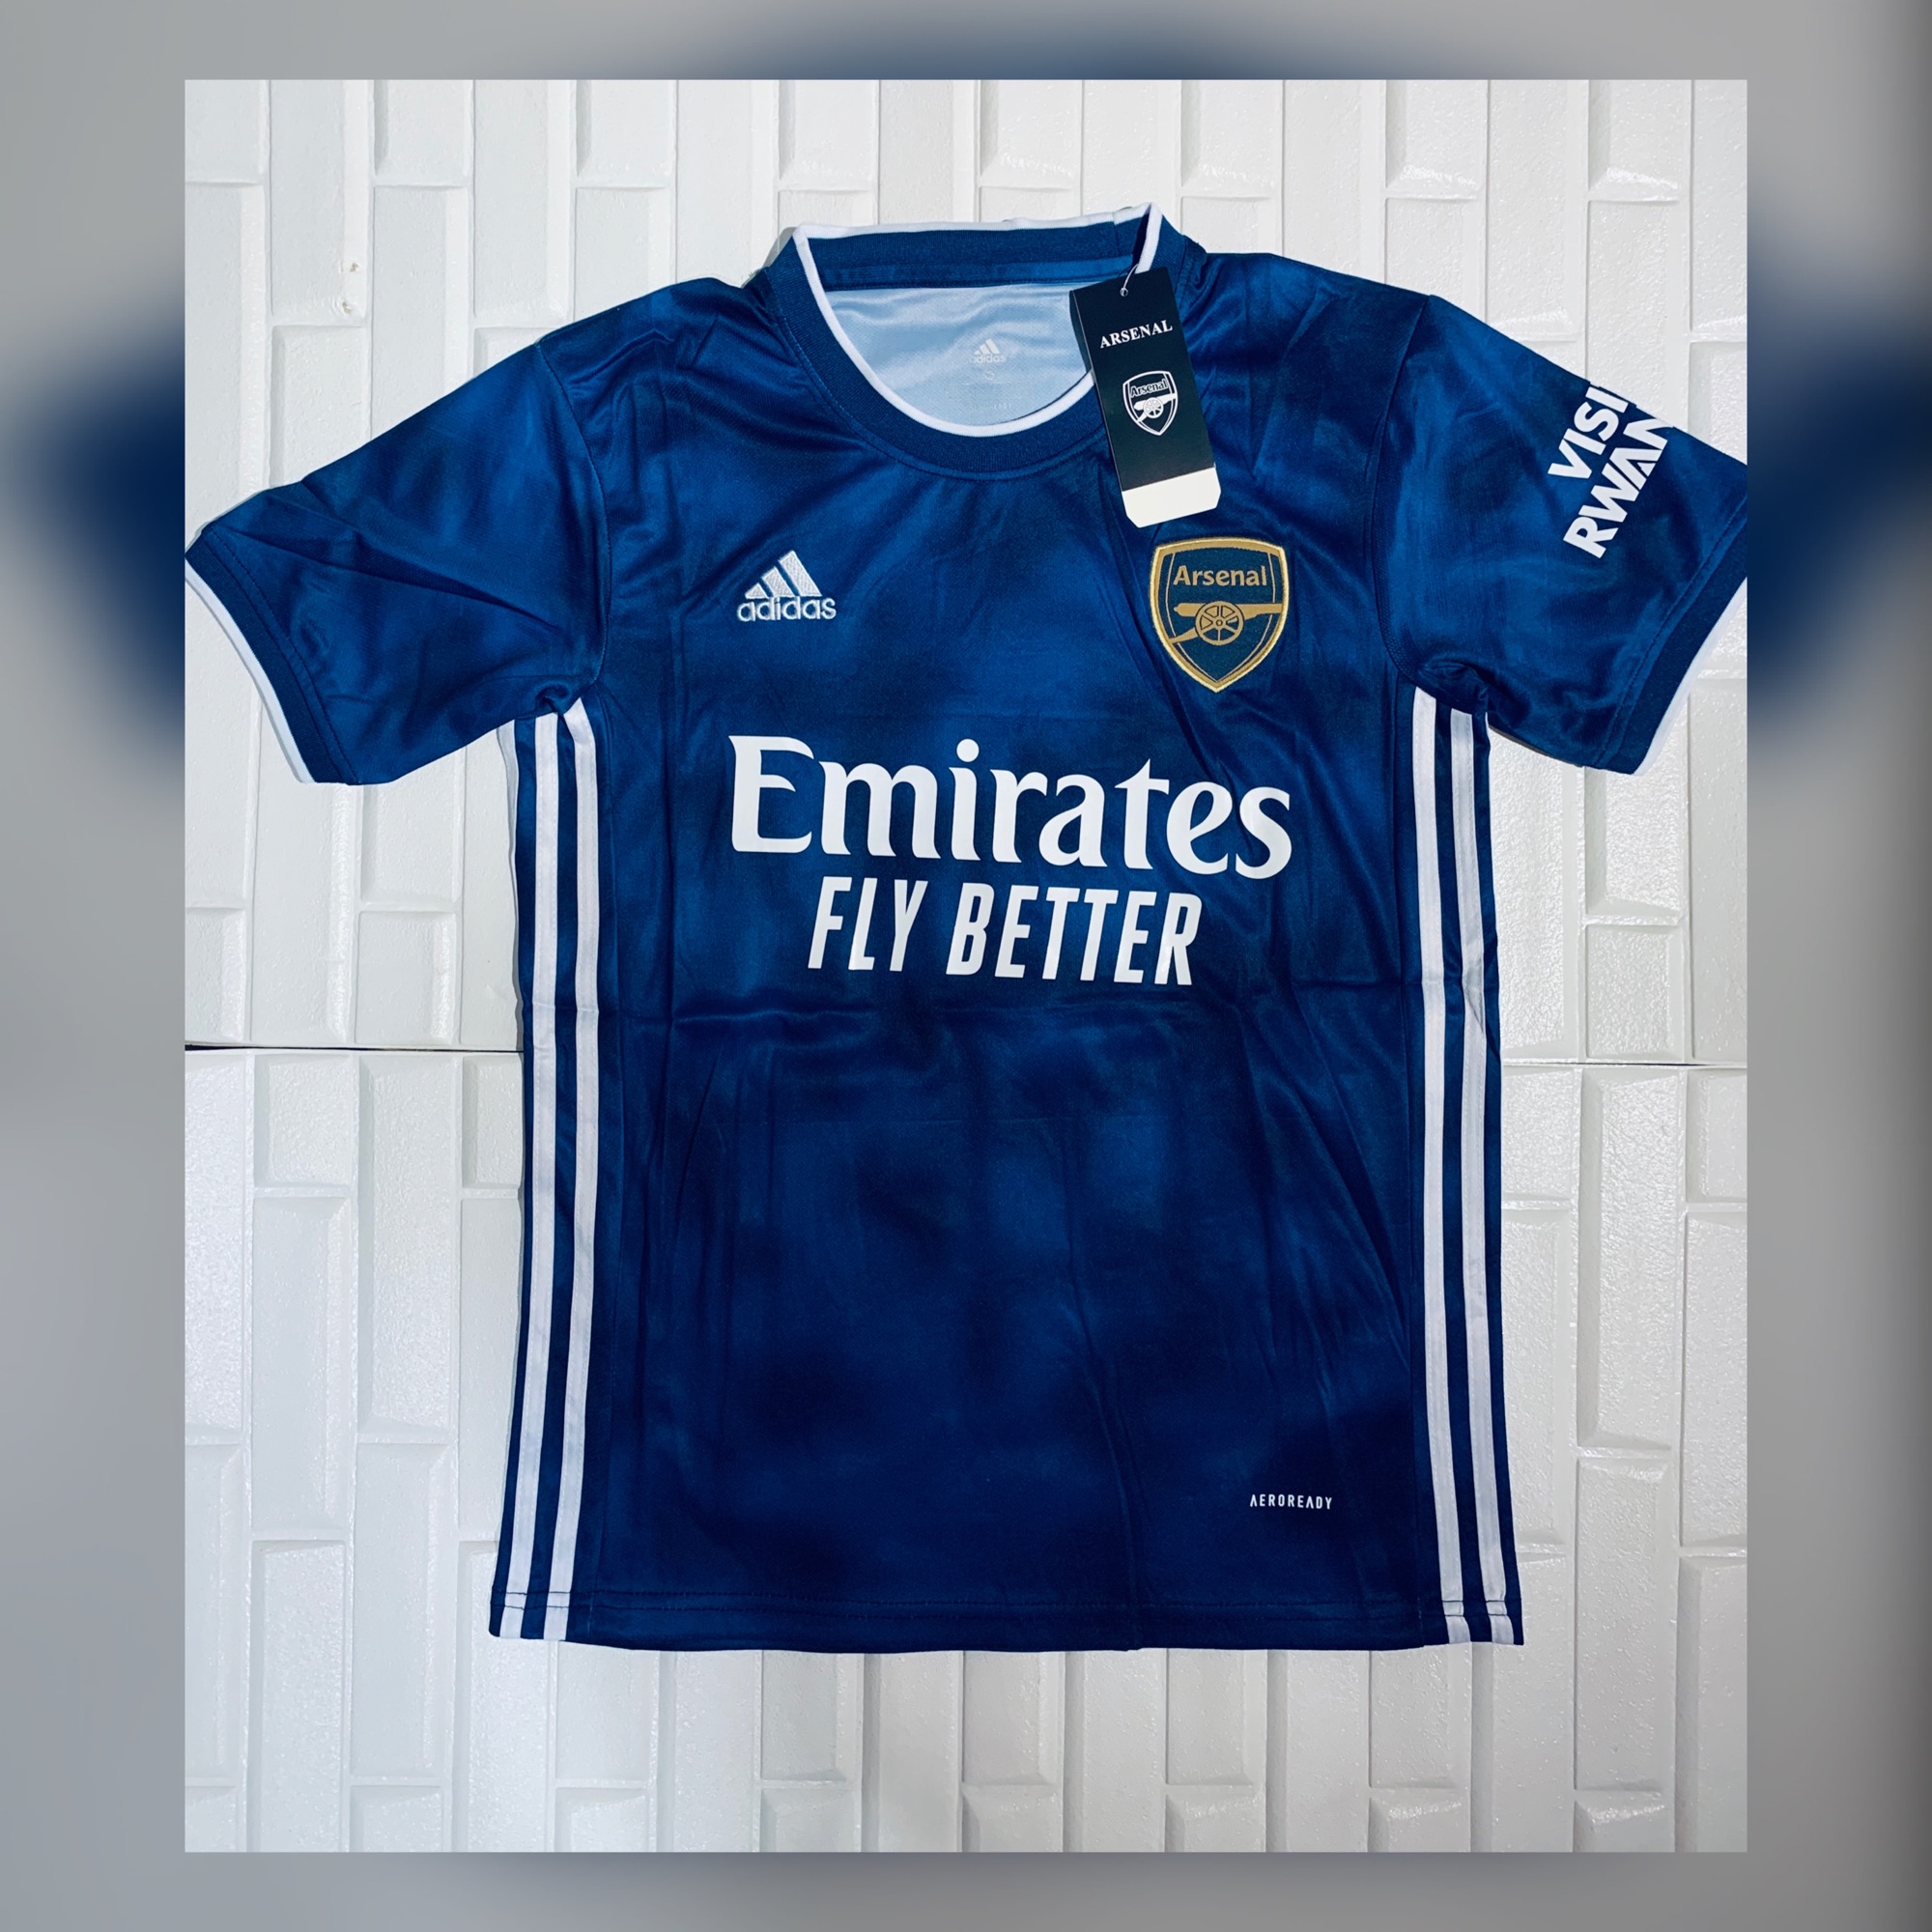 fly emirates jersey price